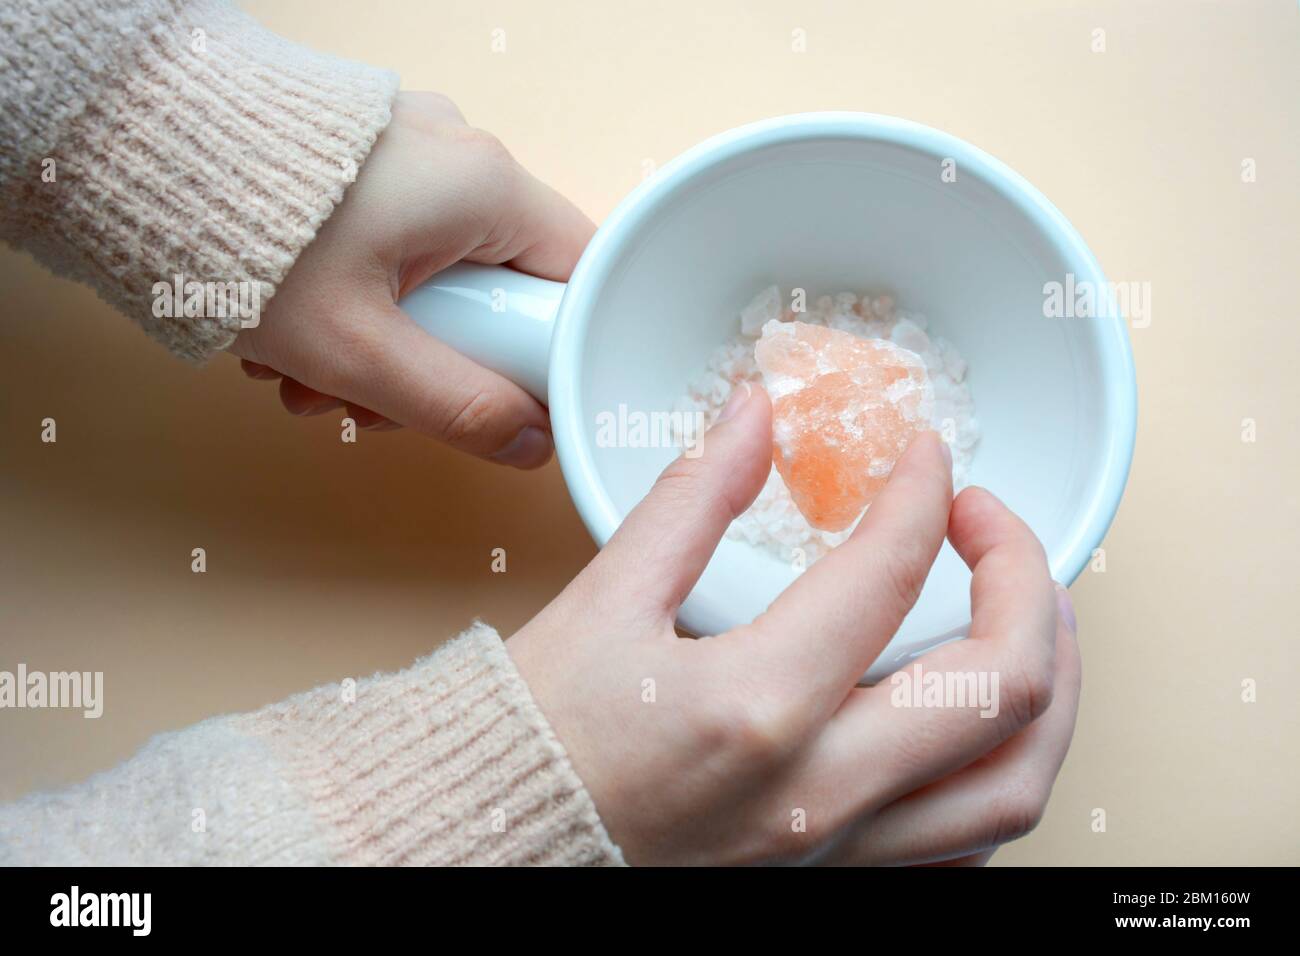 Female hand holding a Himalayan coral pink rock salt crystal above a ceramic white bowl on coral background Stock Photo